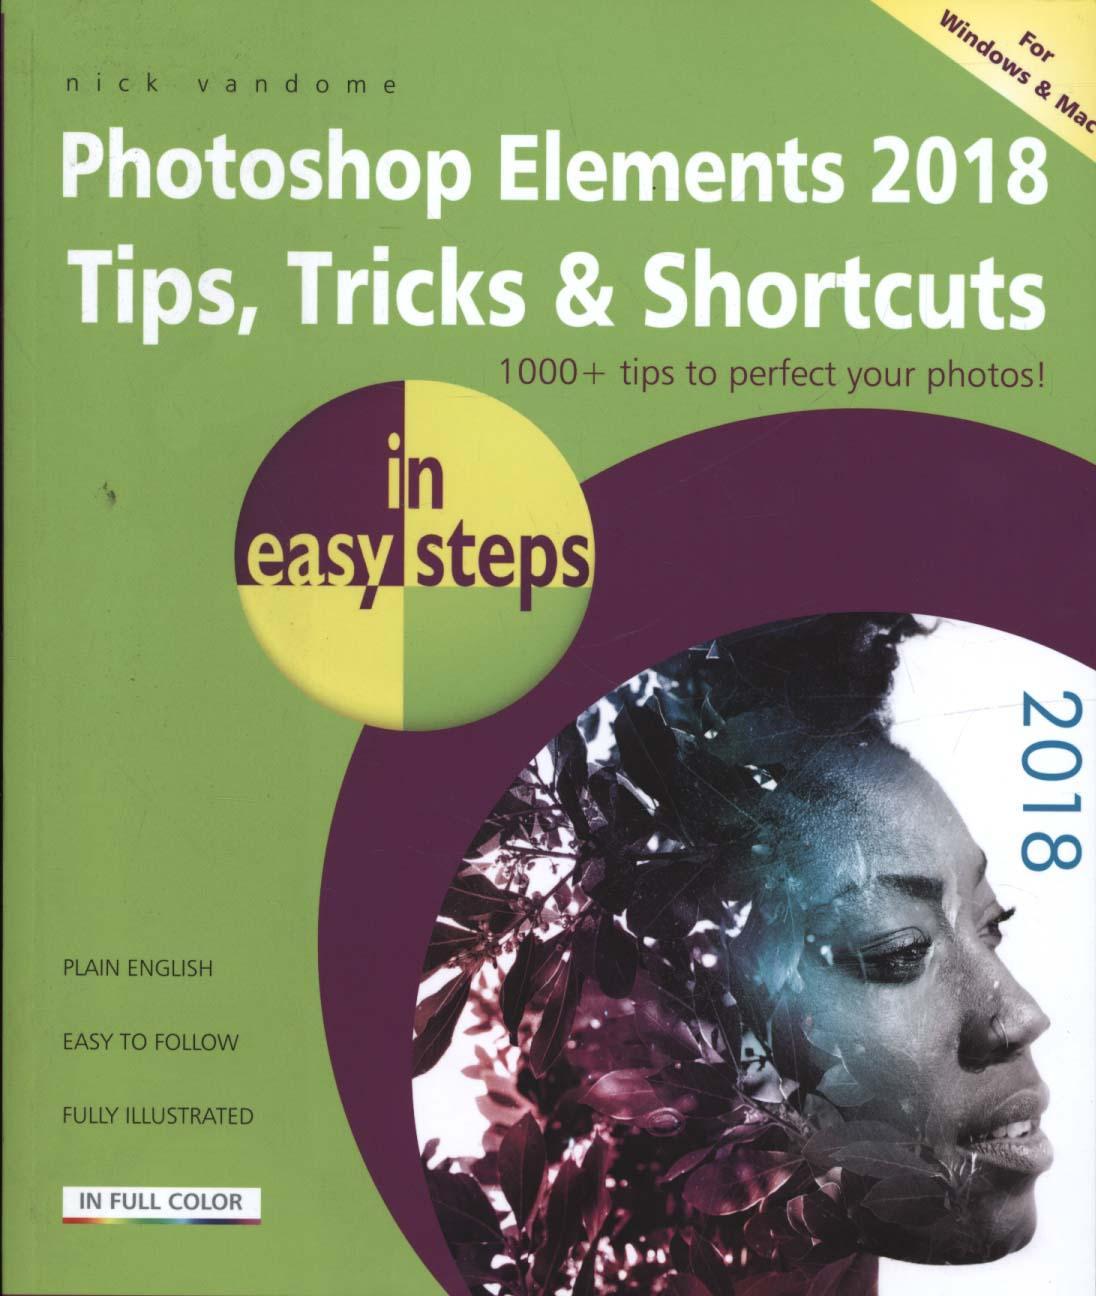 Photoshop Elements 2018 Tips, Tricks & Shortcuts in easy ste